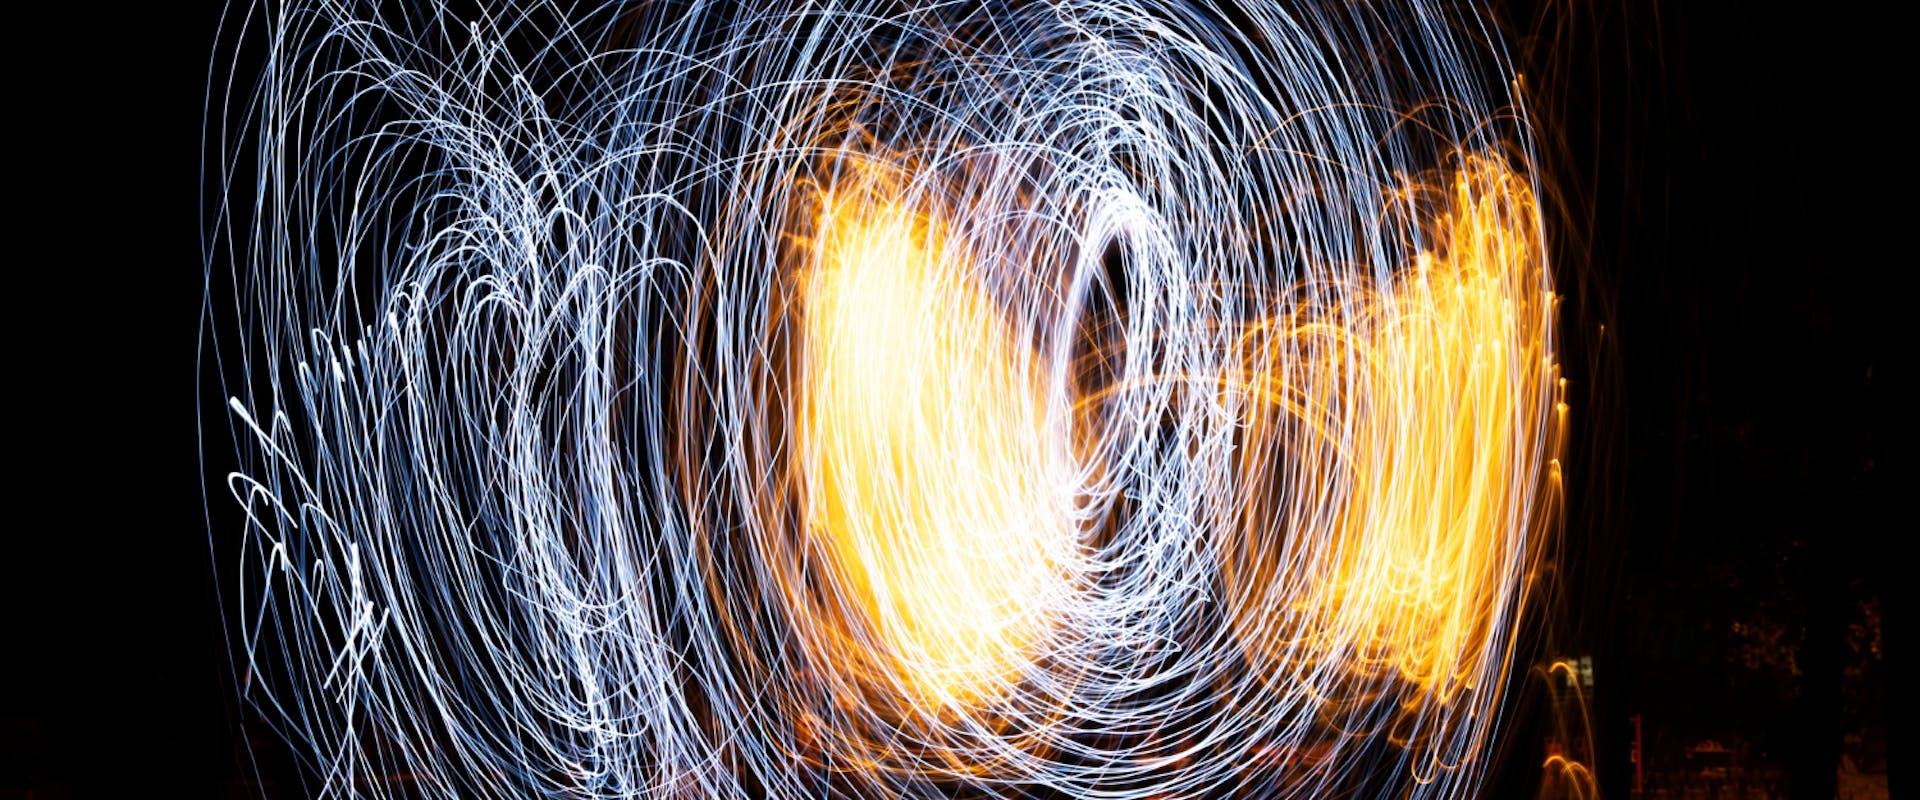 A dynamic light painting image in a circular formation denoting time and frequency waves.